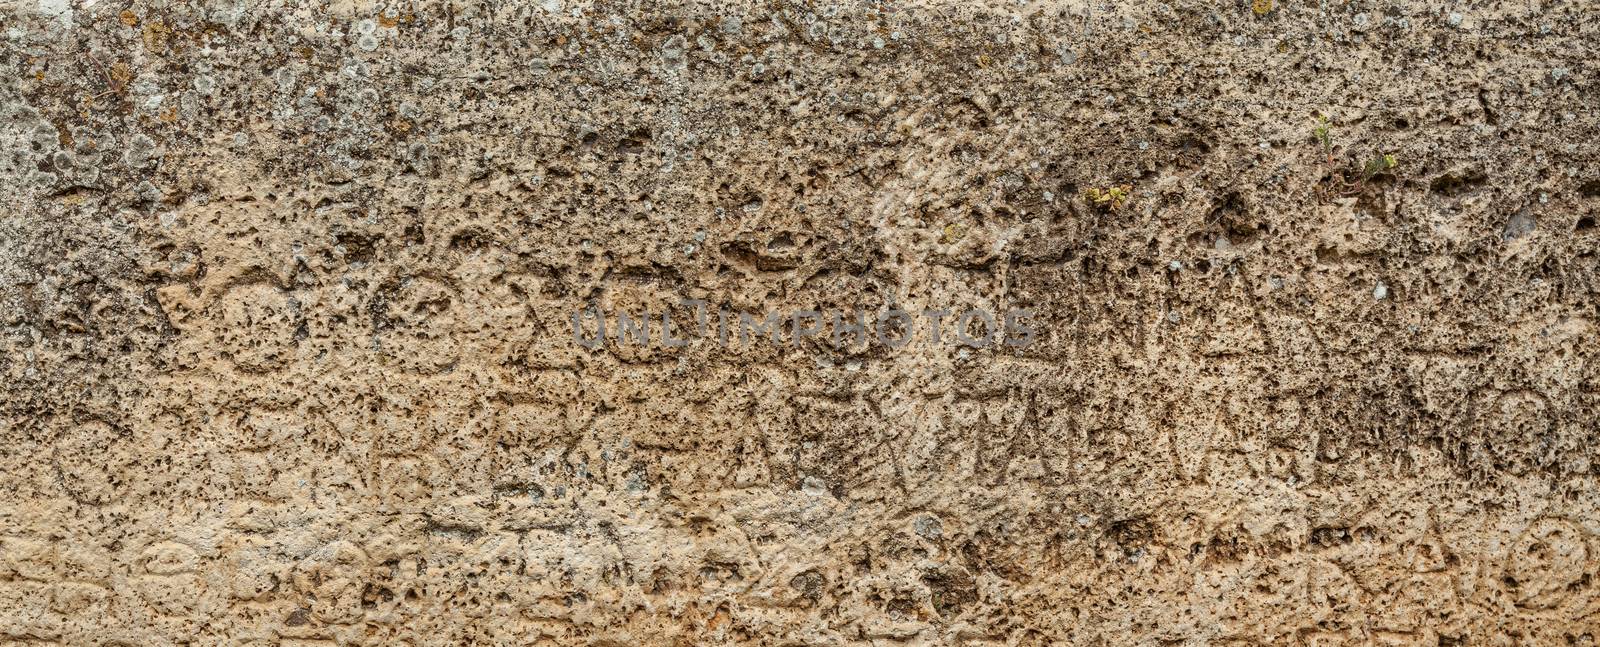 Texture of stone plate with inscriptions in ancient city Hierapolis near Pamukkale, Turkey